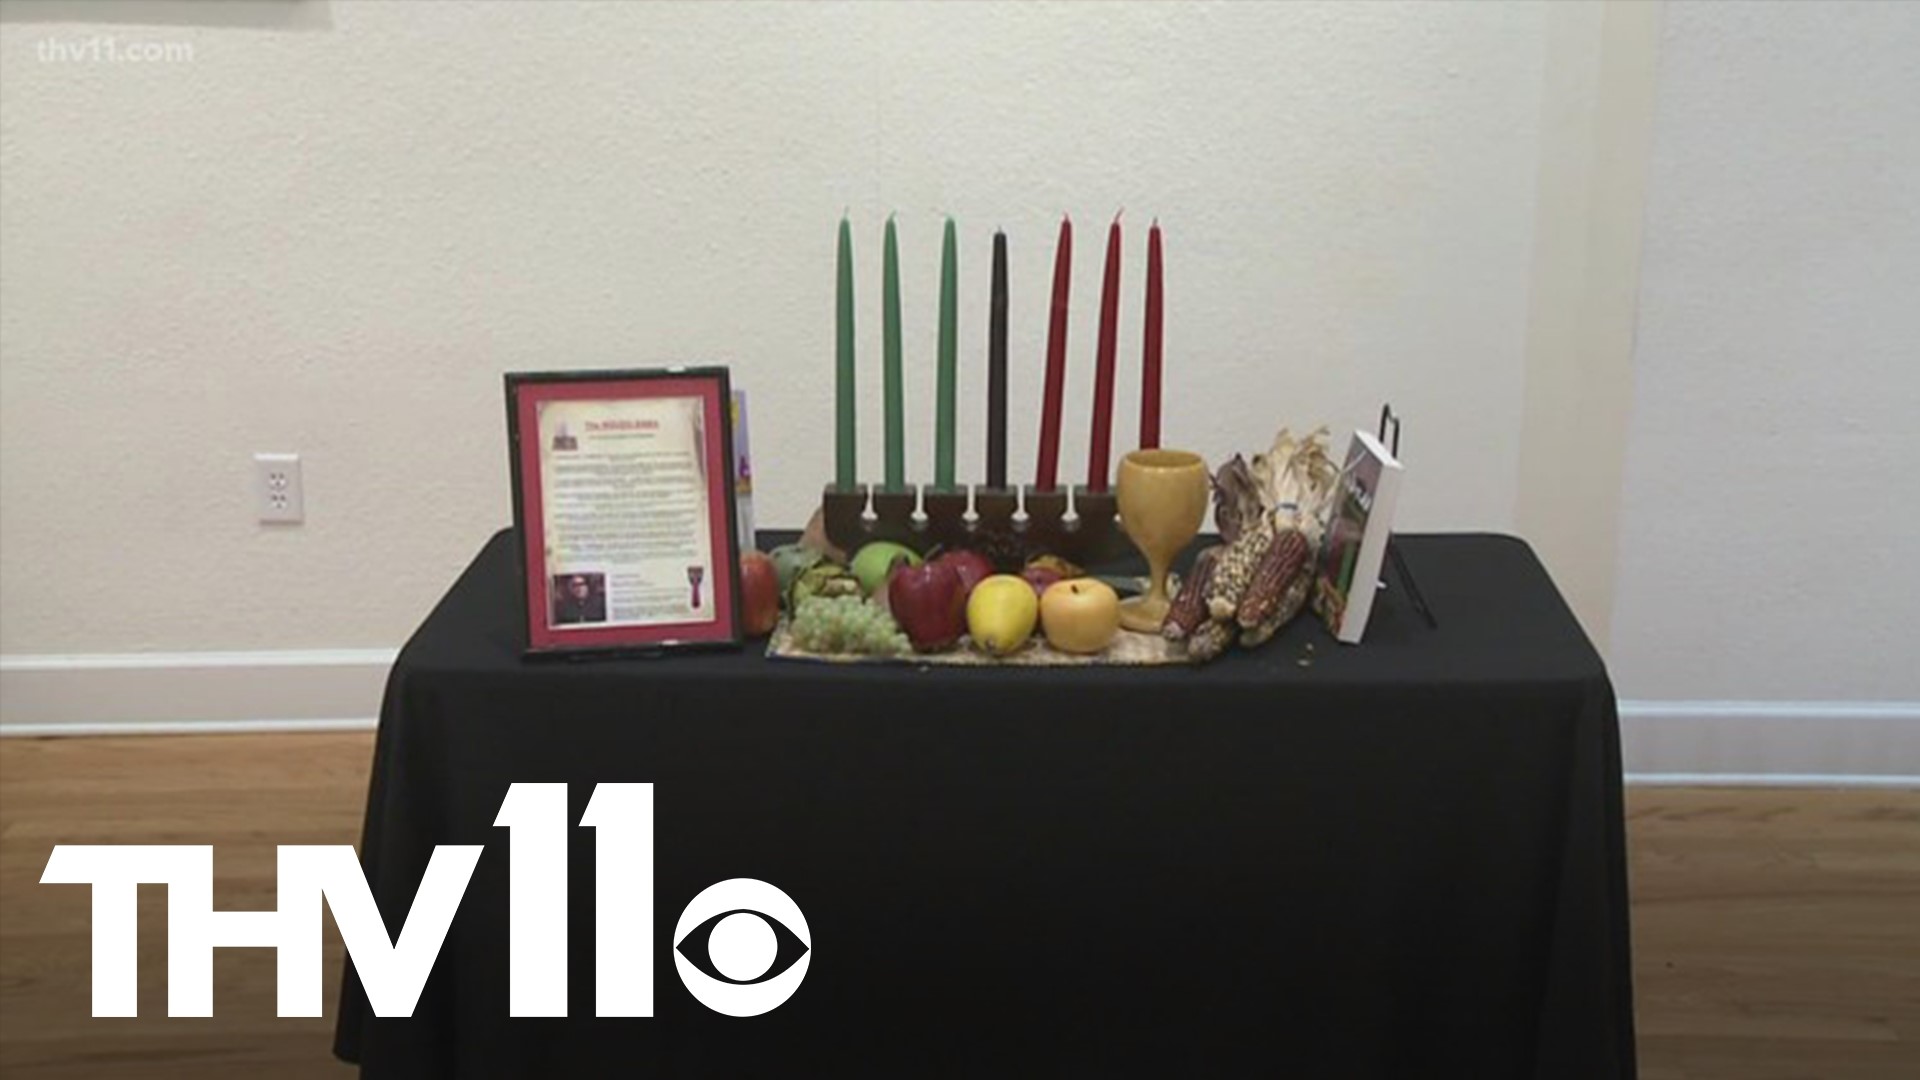 Kwanzaa celebrations are taking place across the country this week. The holiday highlights traditional values in the African American community.